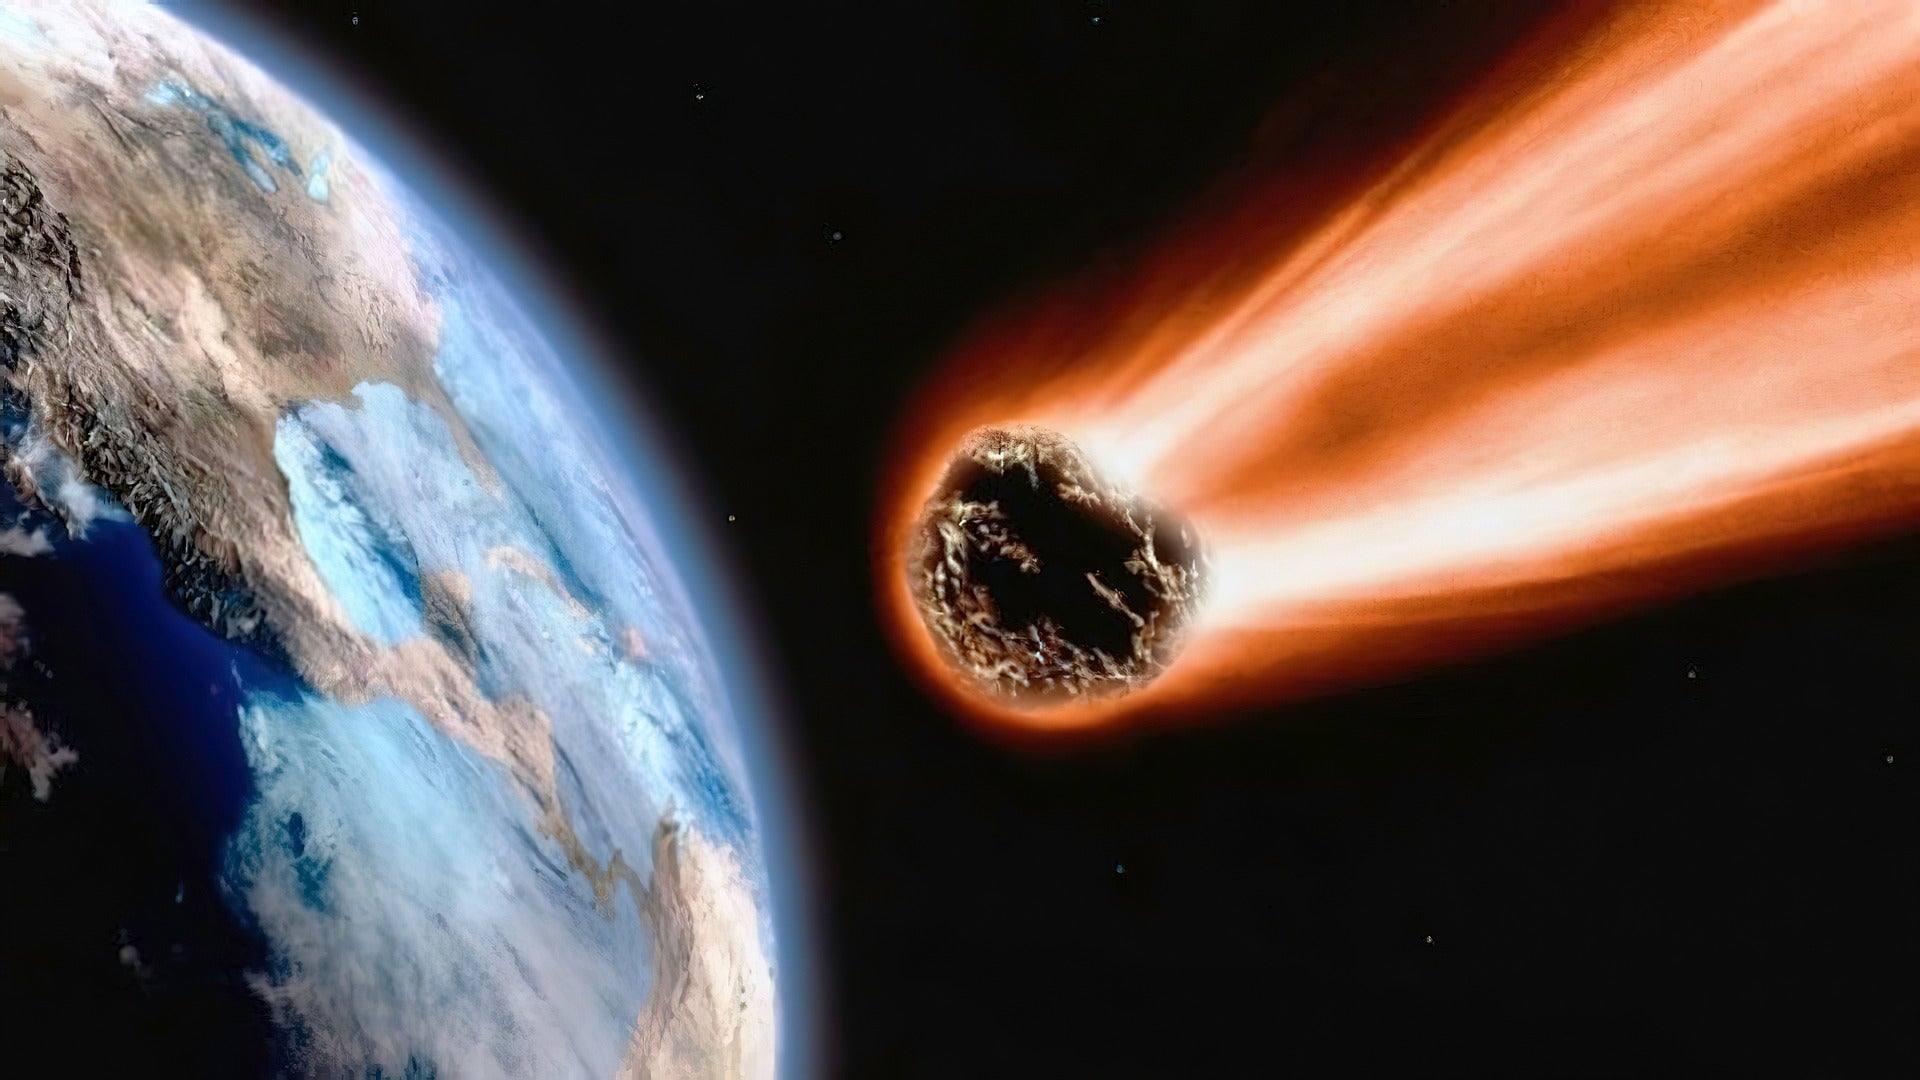 Asteroid flying towards Earth in one of the closest encounters ever